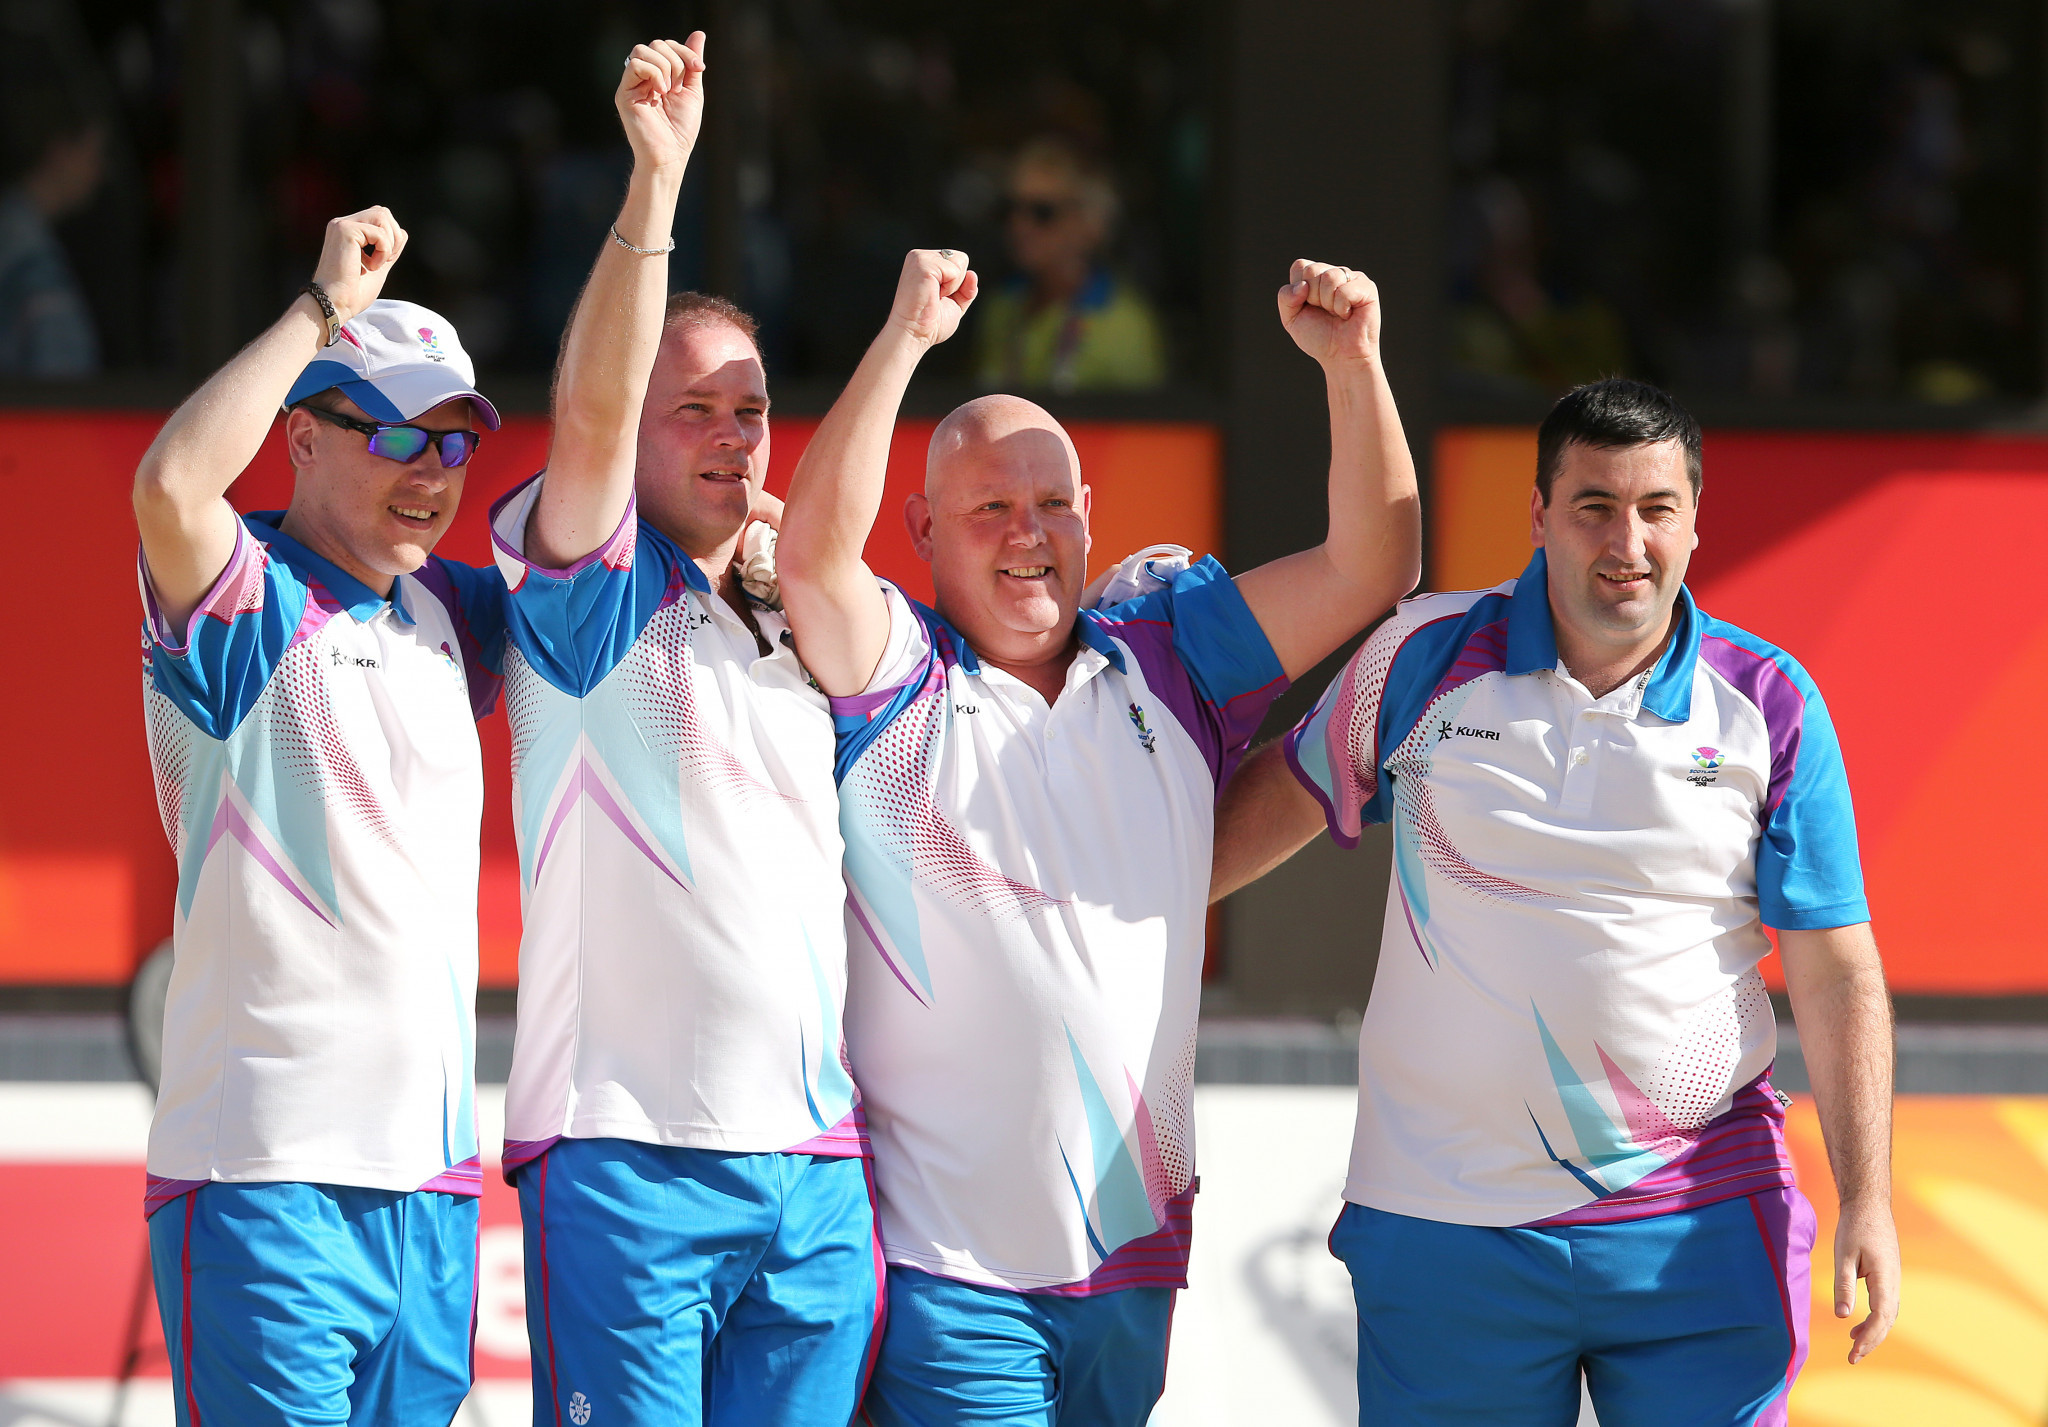 Scotland share joint-records with England as winners of 20 Commonwealth Games bowls gold medals and four-time overall champions at the European Bowls Championships ©Getty Images